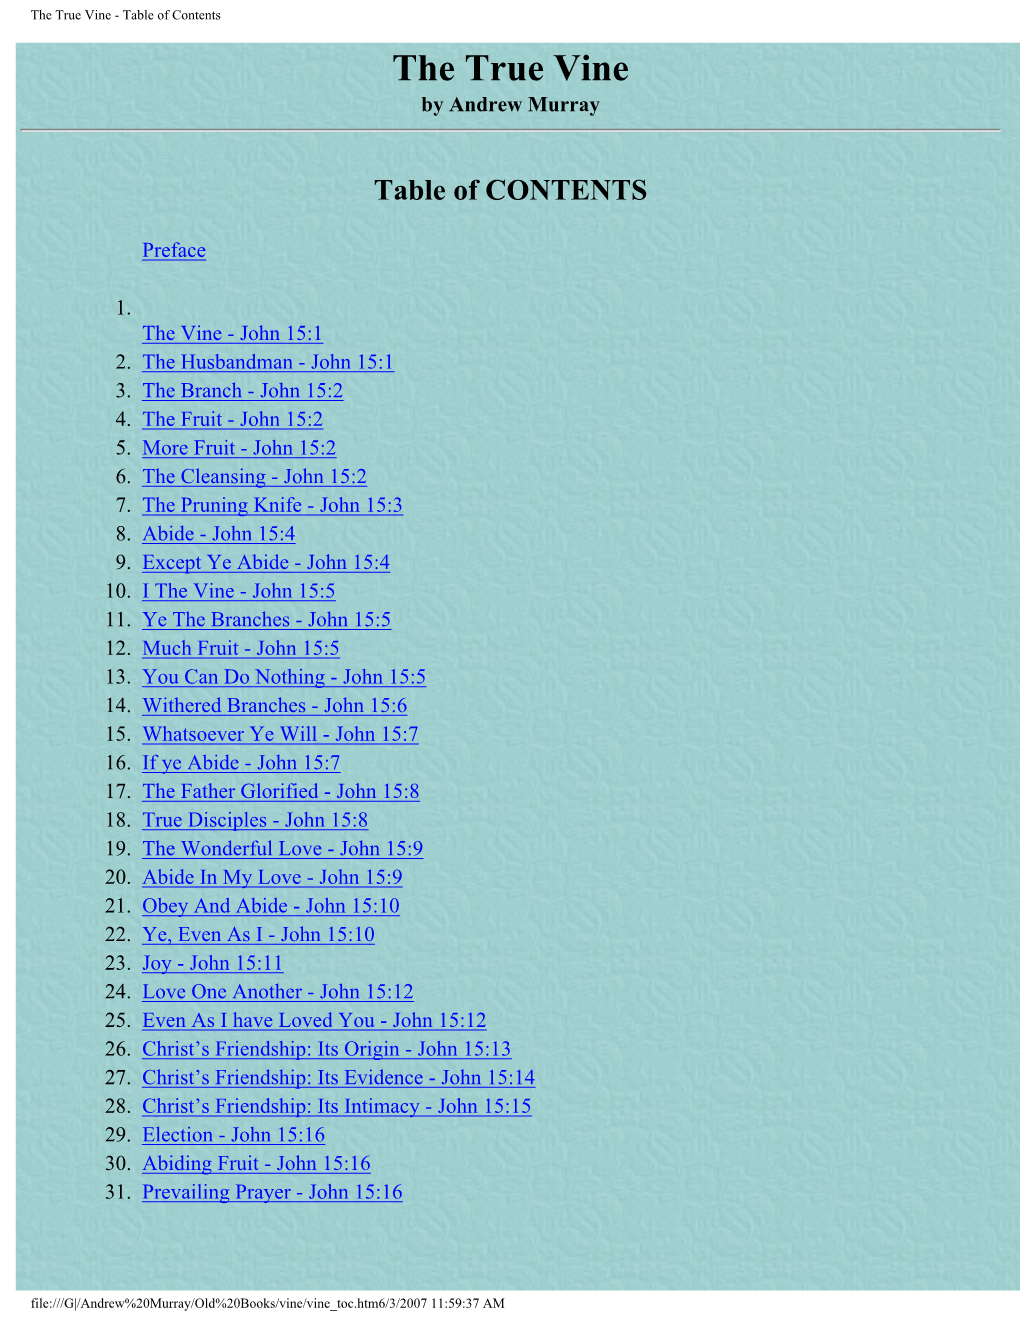 The True Vine - Table of Contents